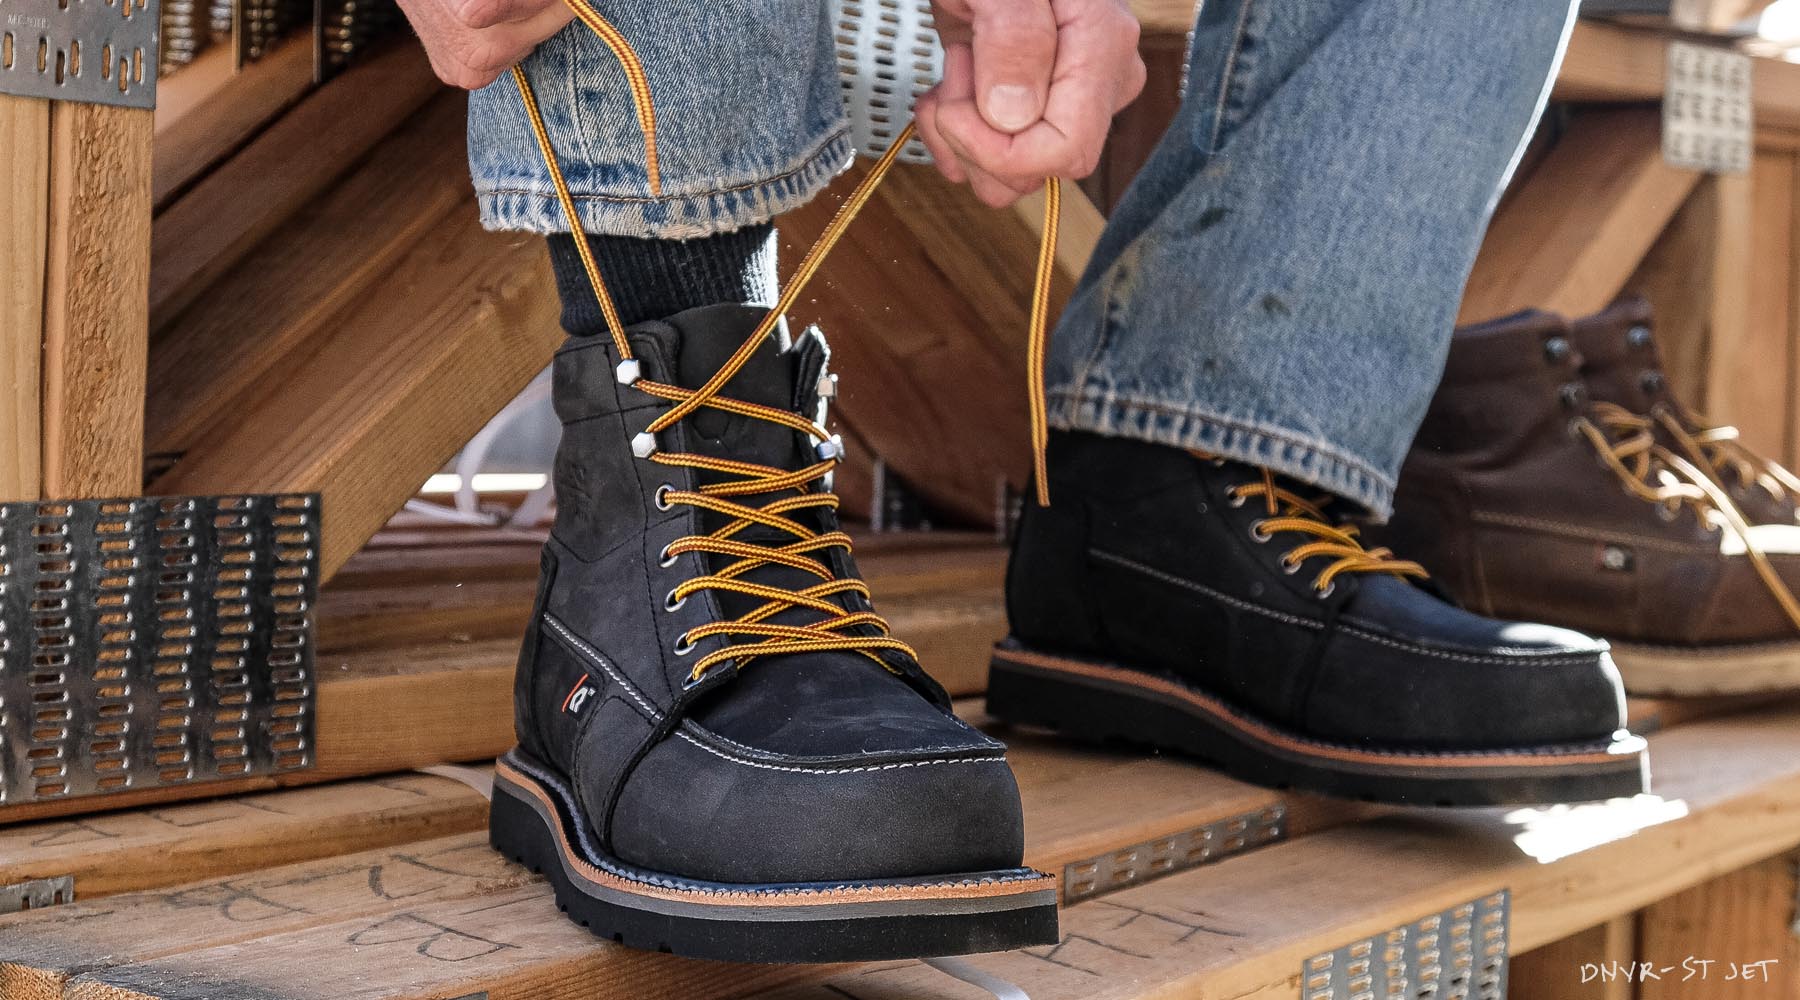 All sizes & colors now available!  BACK IN STOCK SHOP SOFT TOE SHOP STEEL TOE lace up to comfort